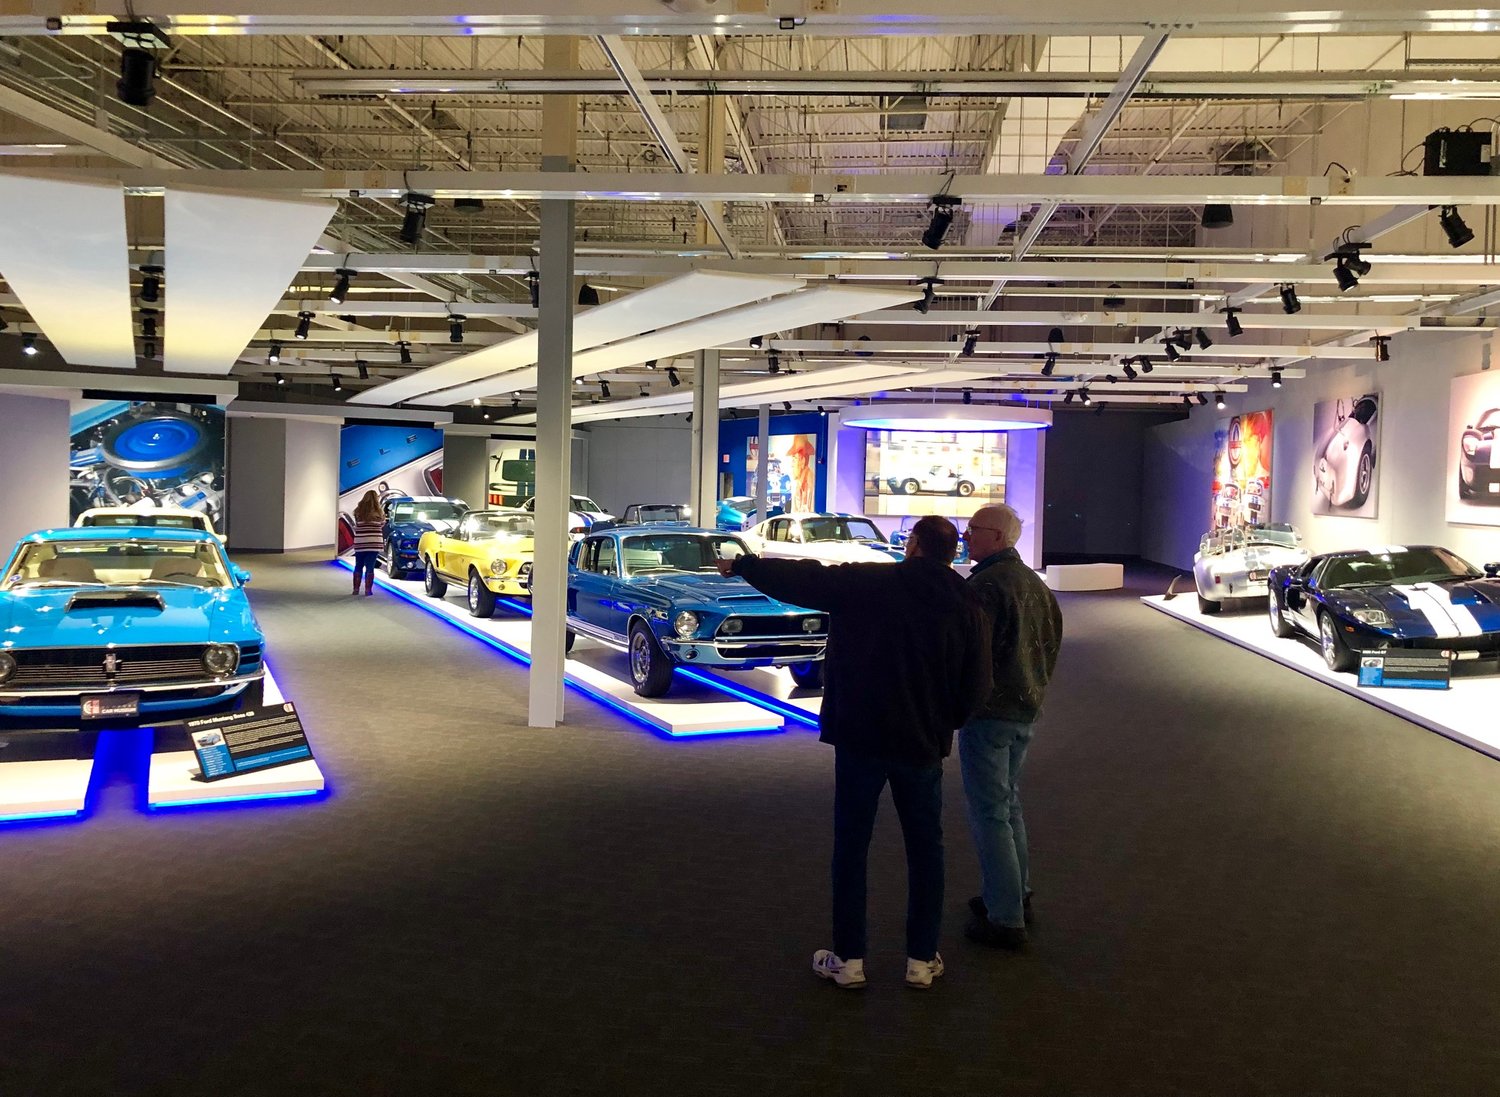 A visit to the Newport Car Museum is free for dads all week